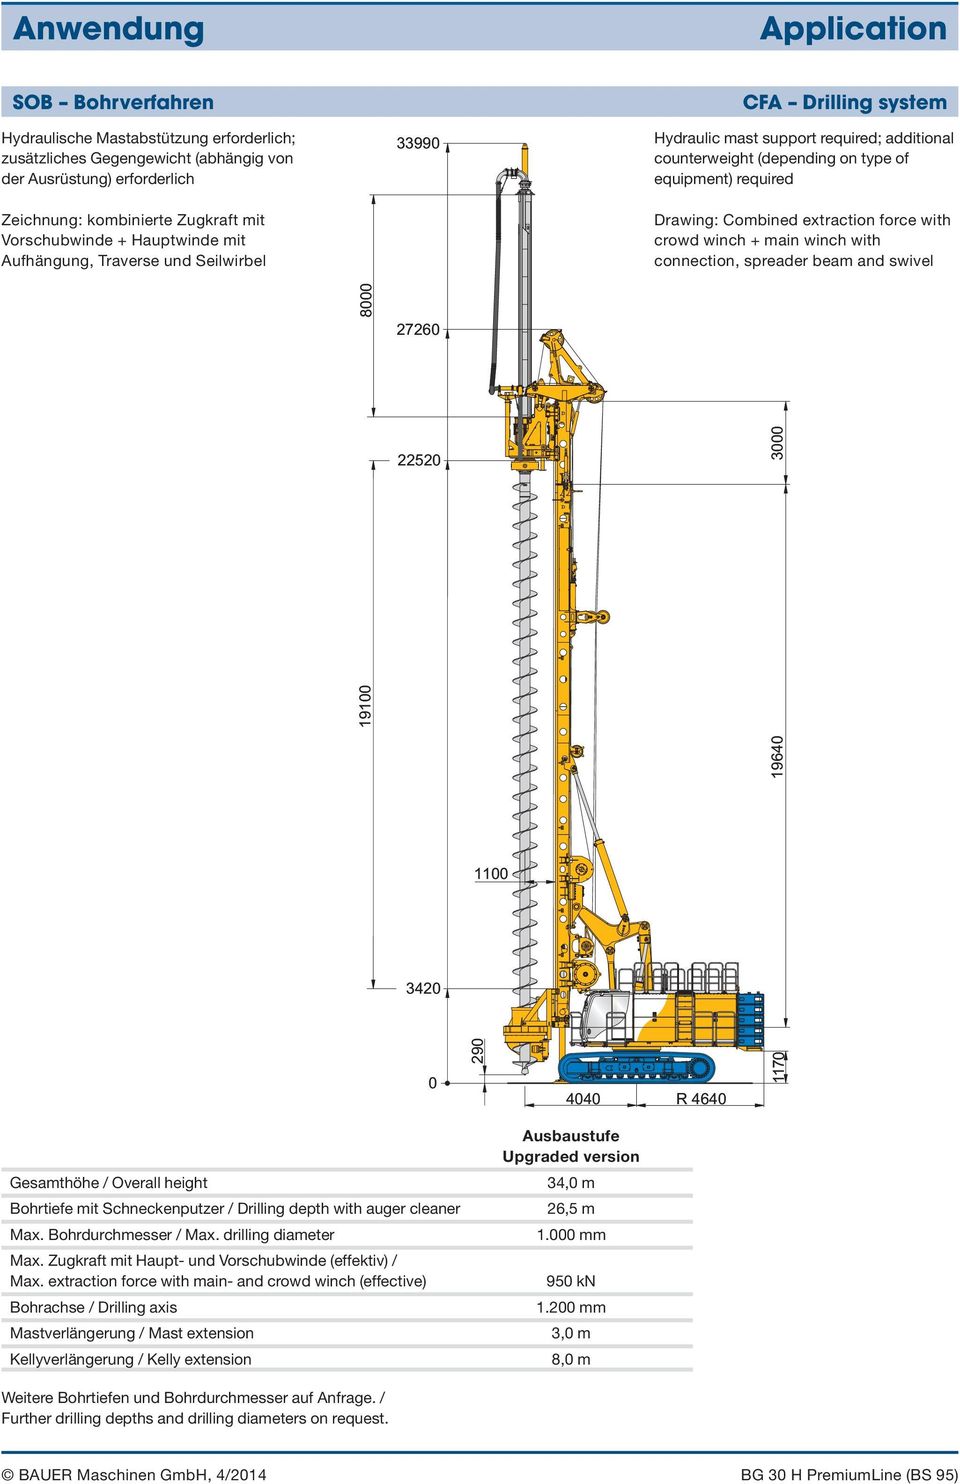 Hydraulic mast support required; additional counterweight (depending on type of equipment) required 33990 Drawing: Combined extraction force with crowd winch + main winch with connection, spreader